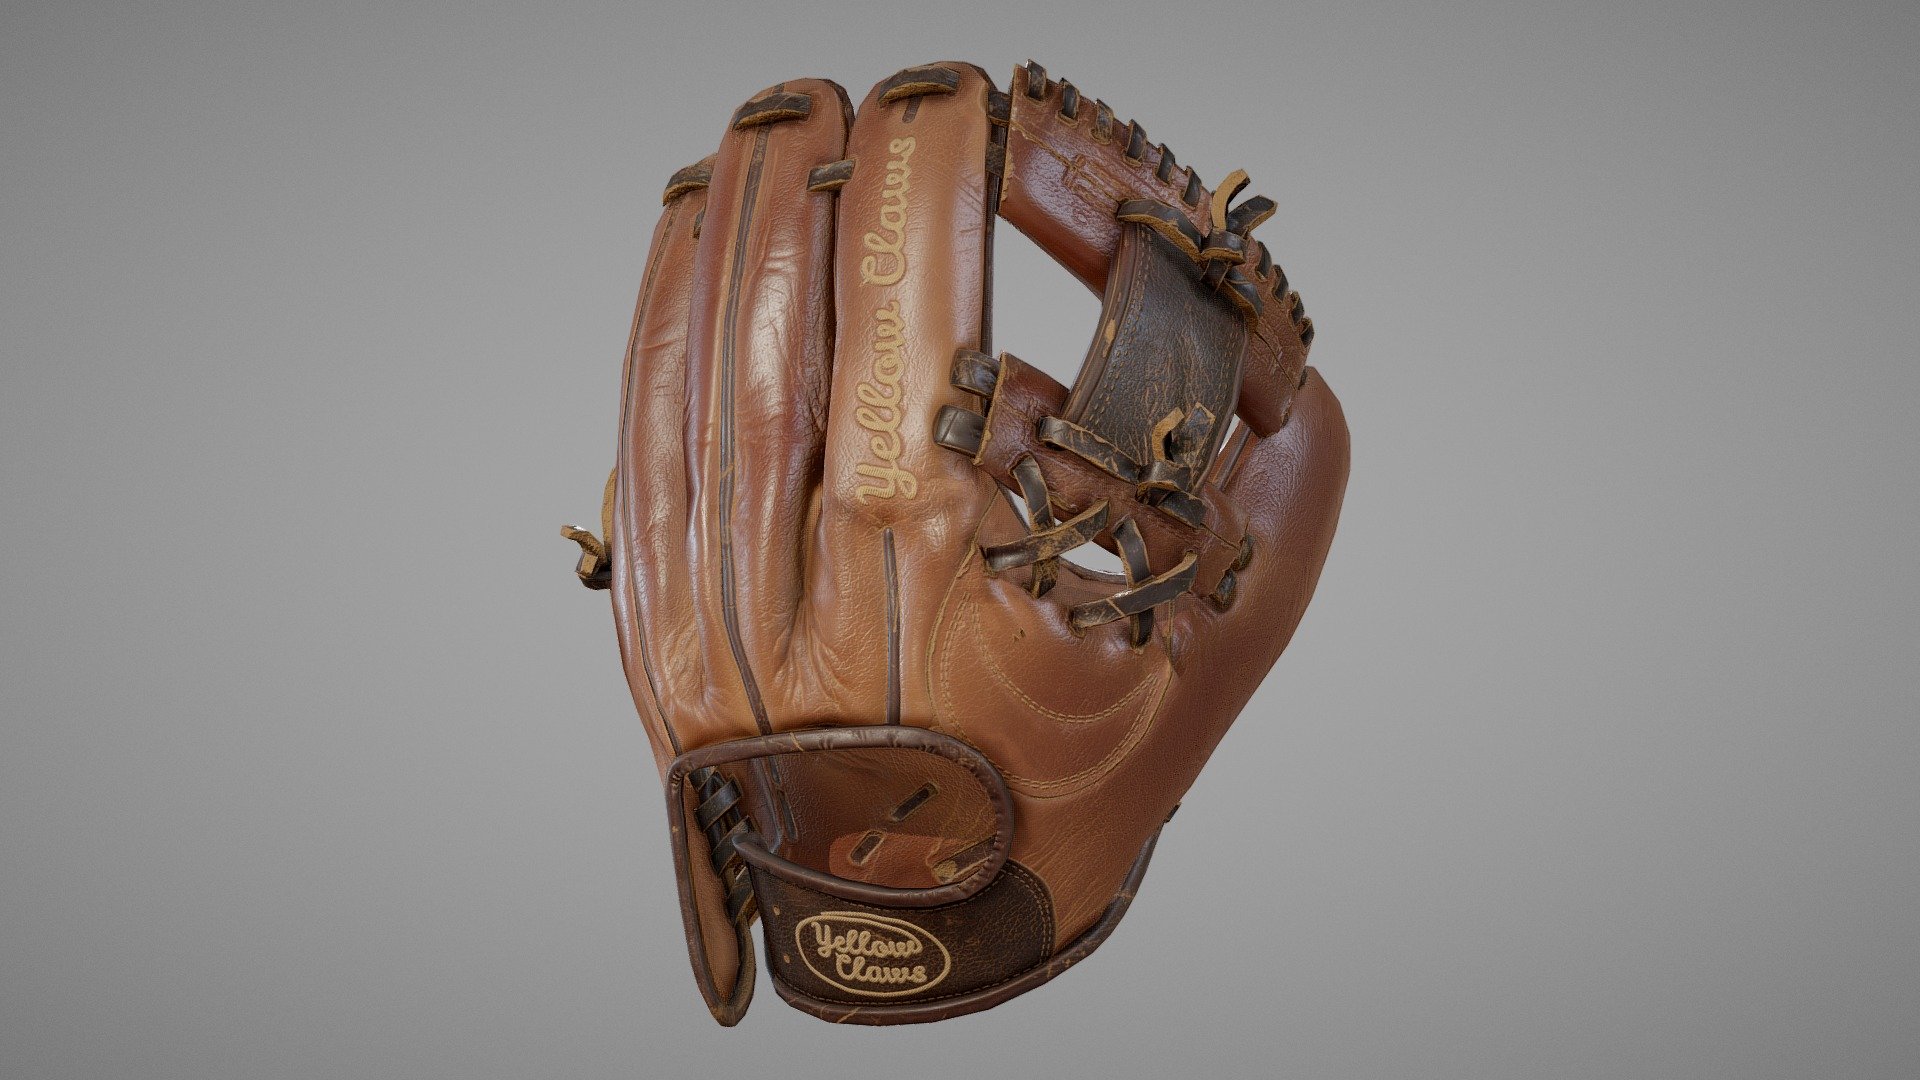 Game ready baseball glove.

5786 tris; 3110 verts; 1x4096x4096 texture; Albedo, Metal/Gloss, Normal, Ambient Occlusion 3d model